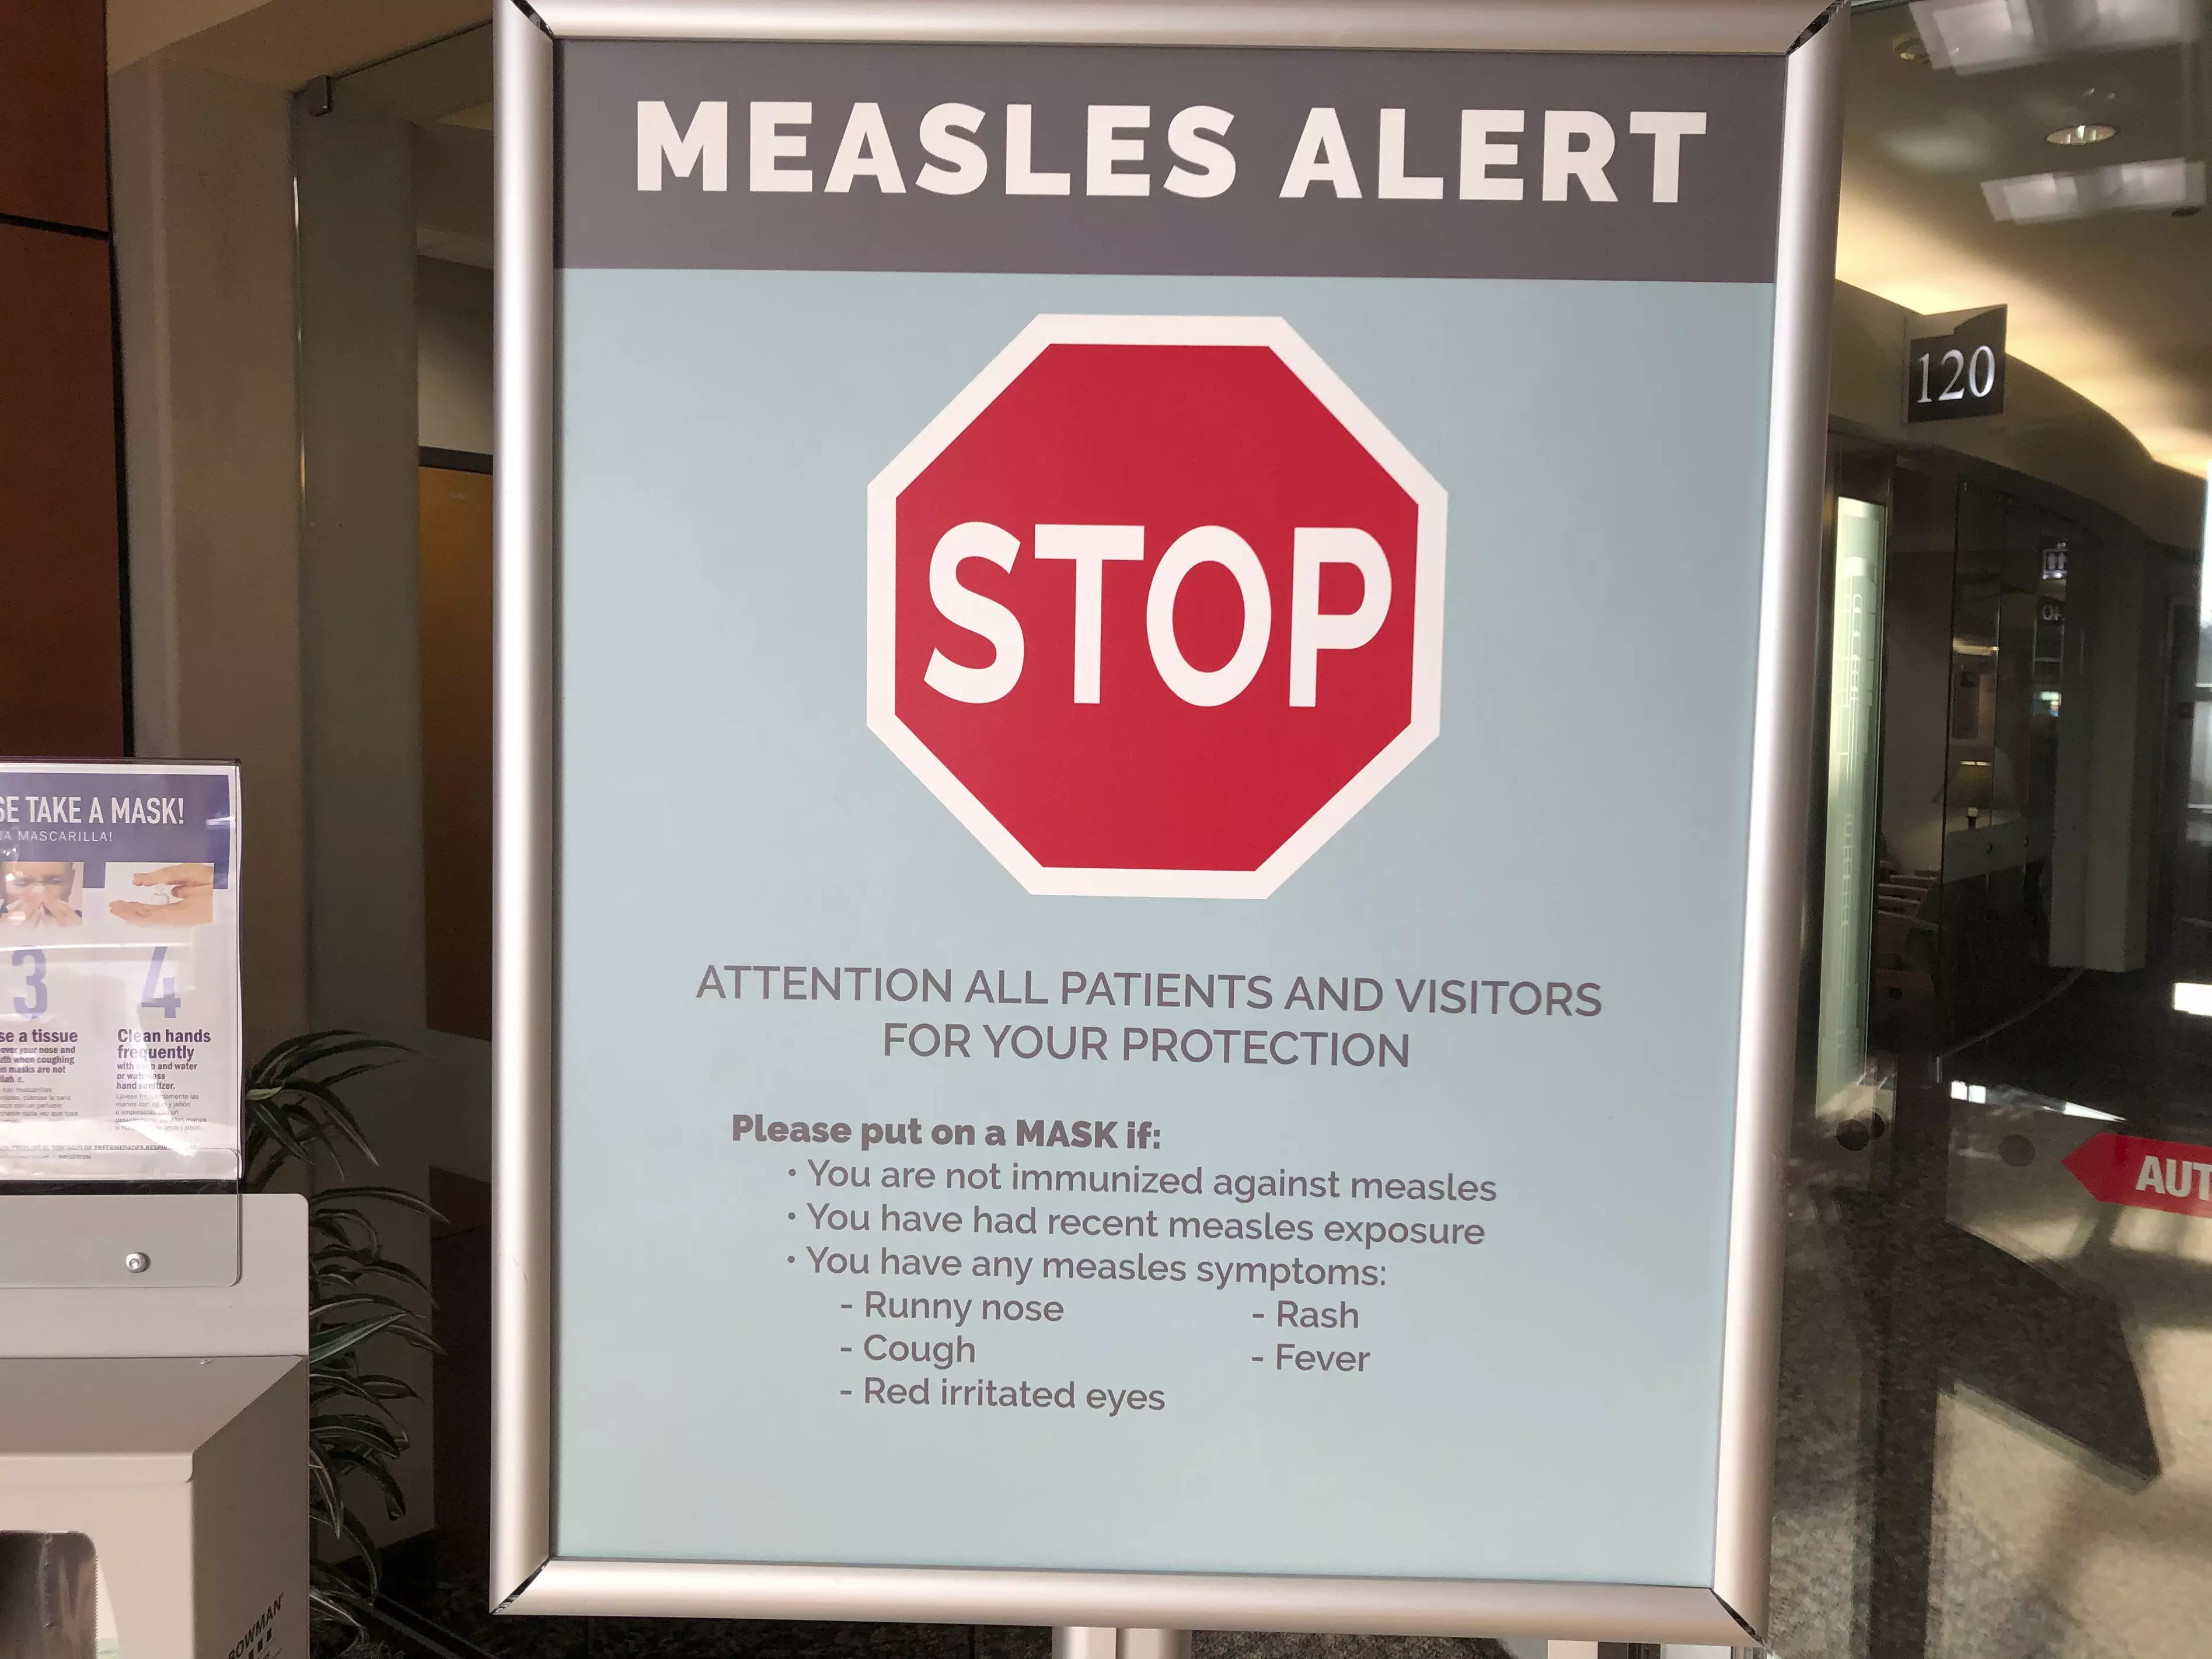 Washington State recently had a large measles outbreak.